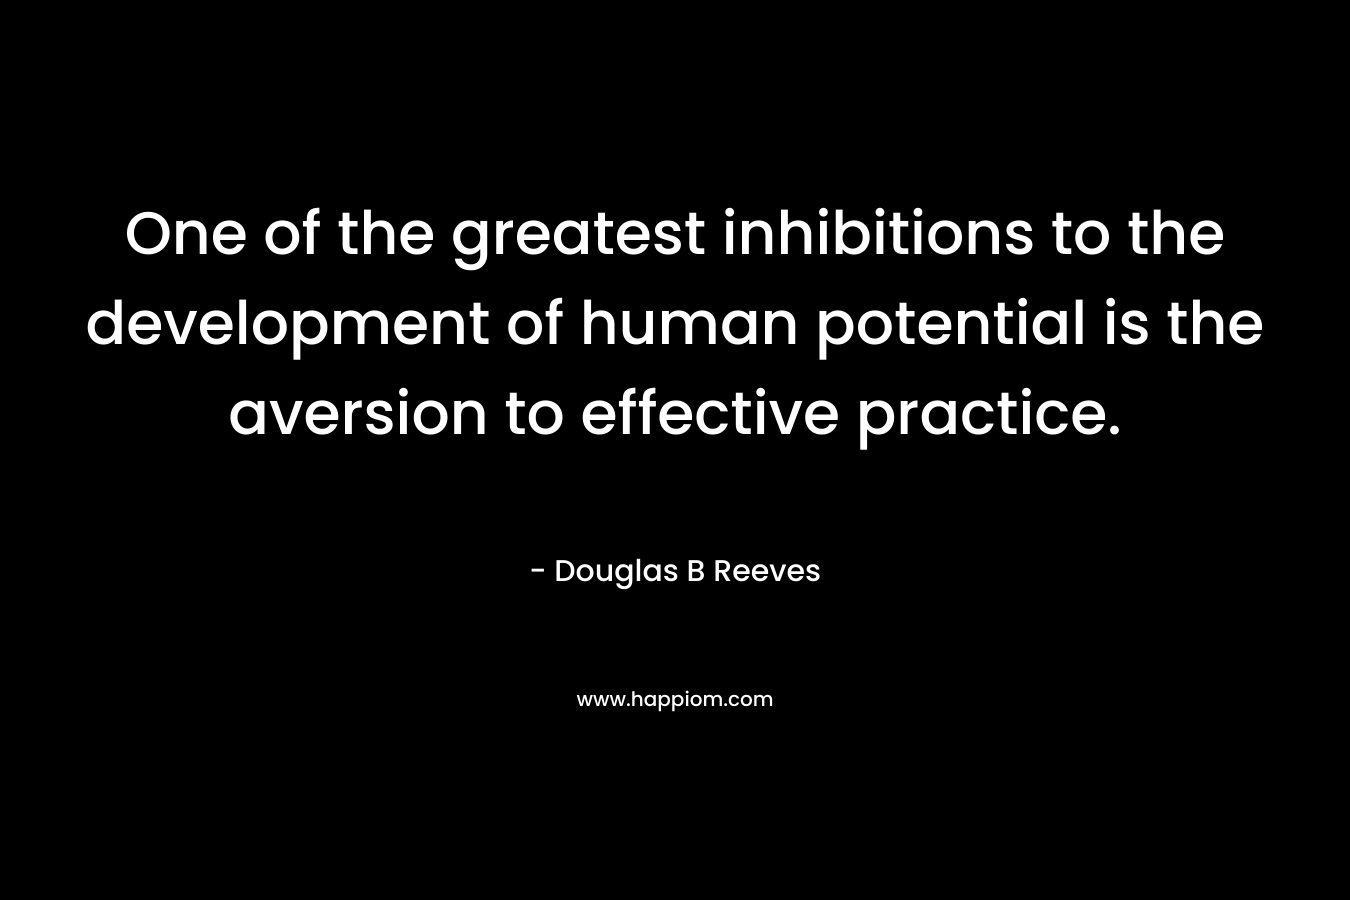 One of the greatest inhibitions to the development of human potential is the aversion to effective practice. – Douglas B Reeves